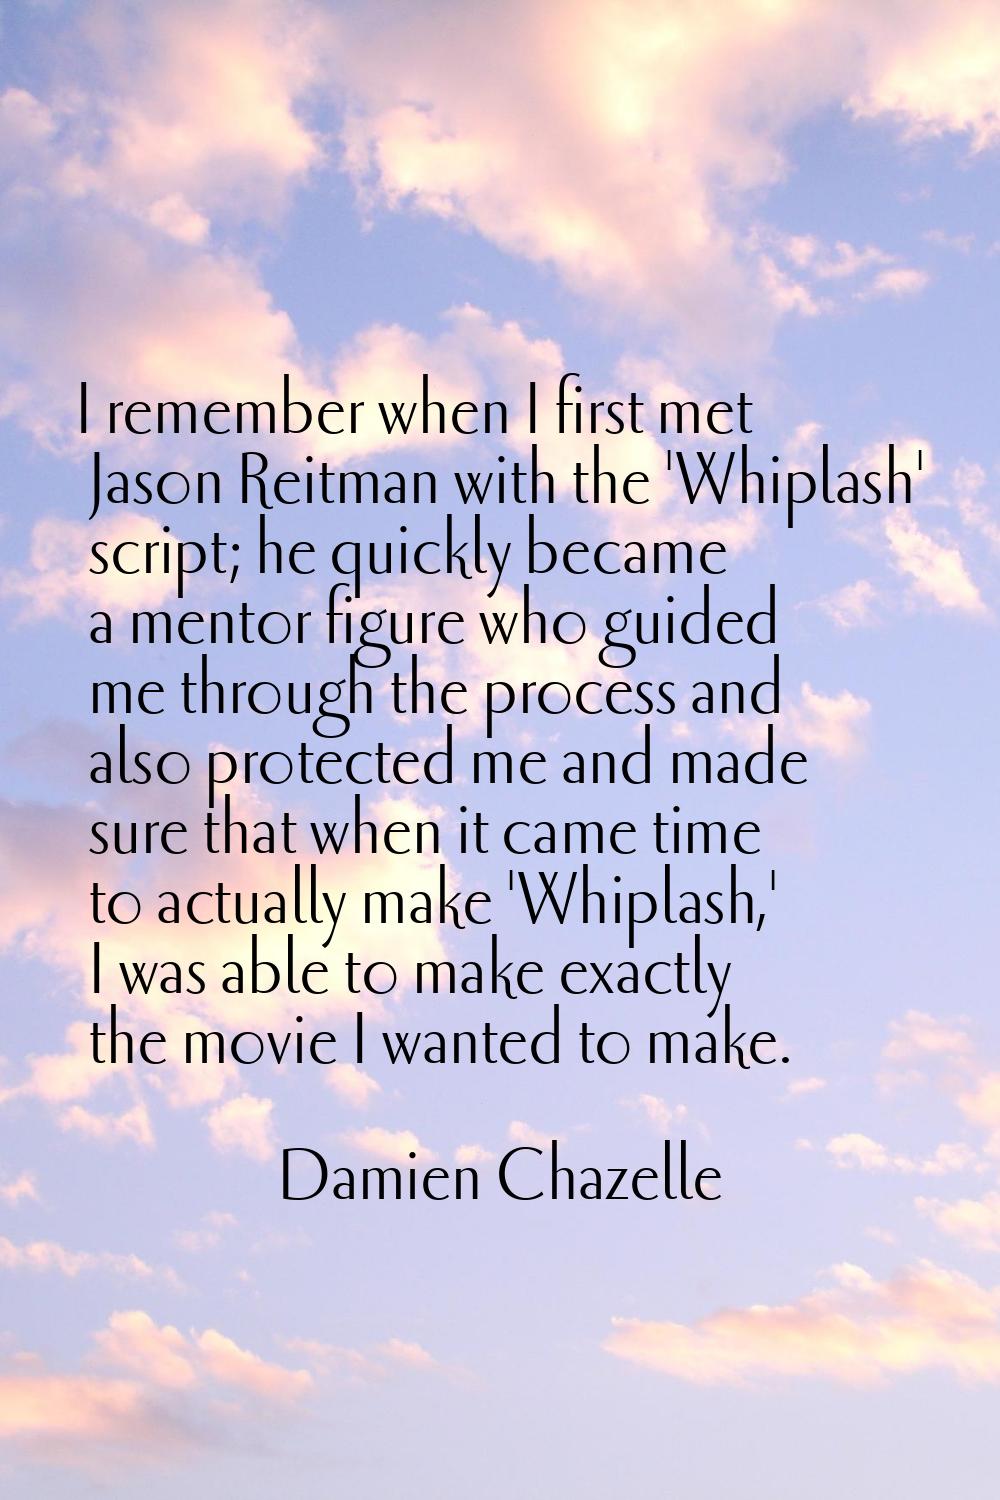 I remember when I first met Jason Reitman with the 'Whiplash' script; he quickly became a mentor fi